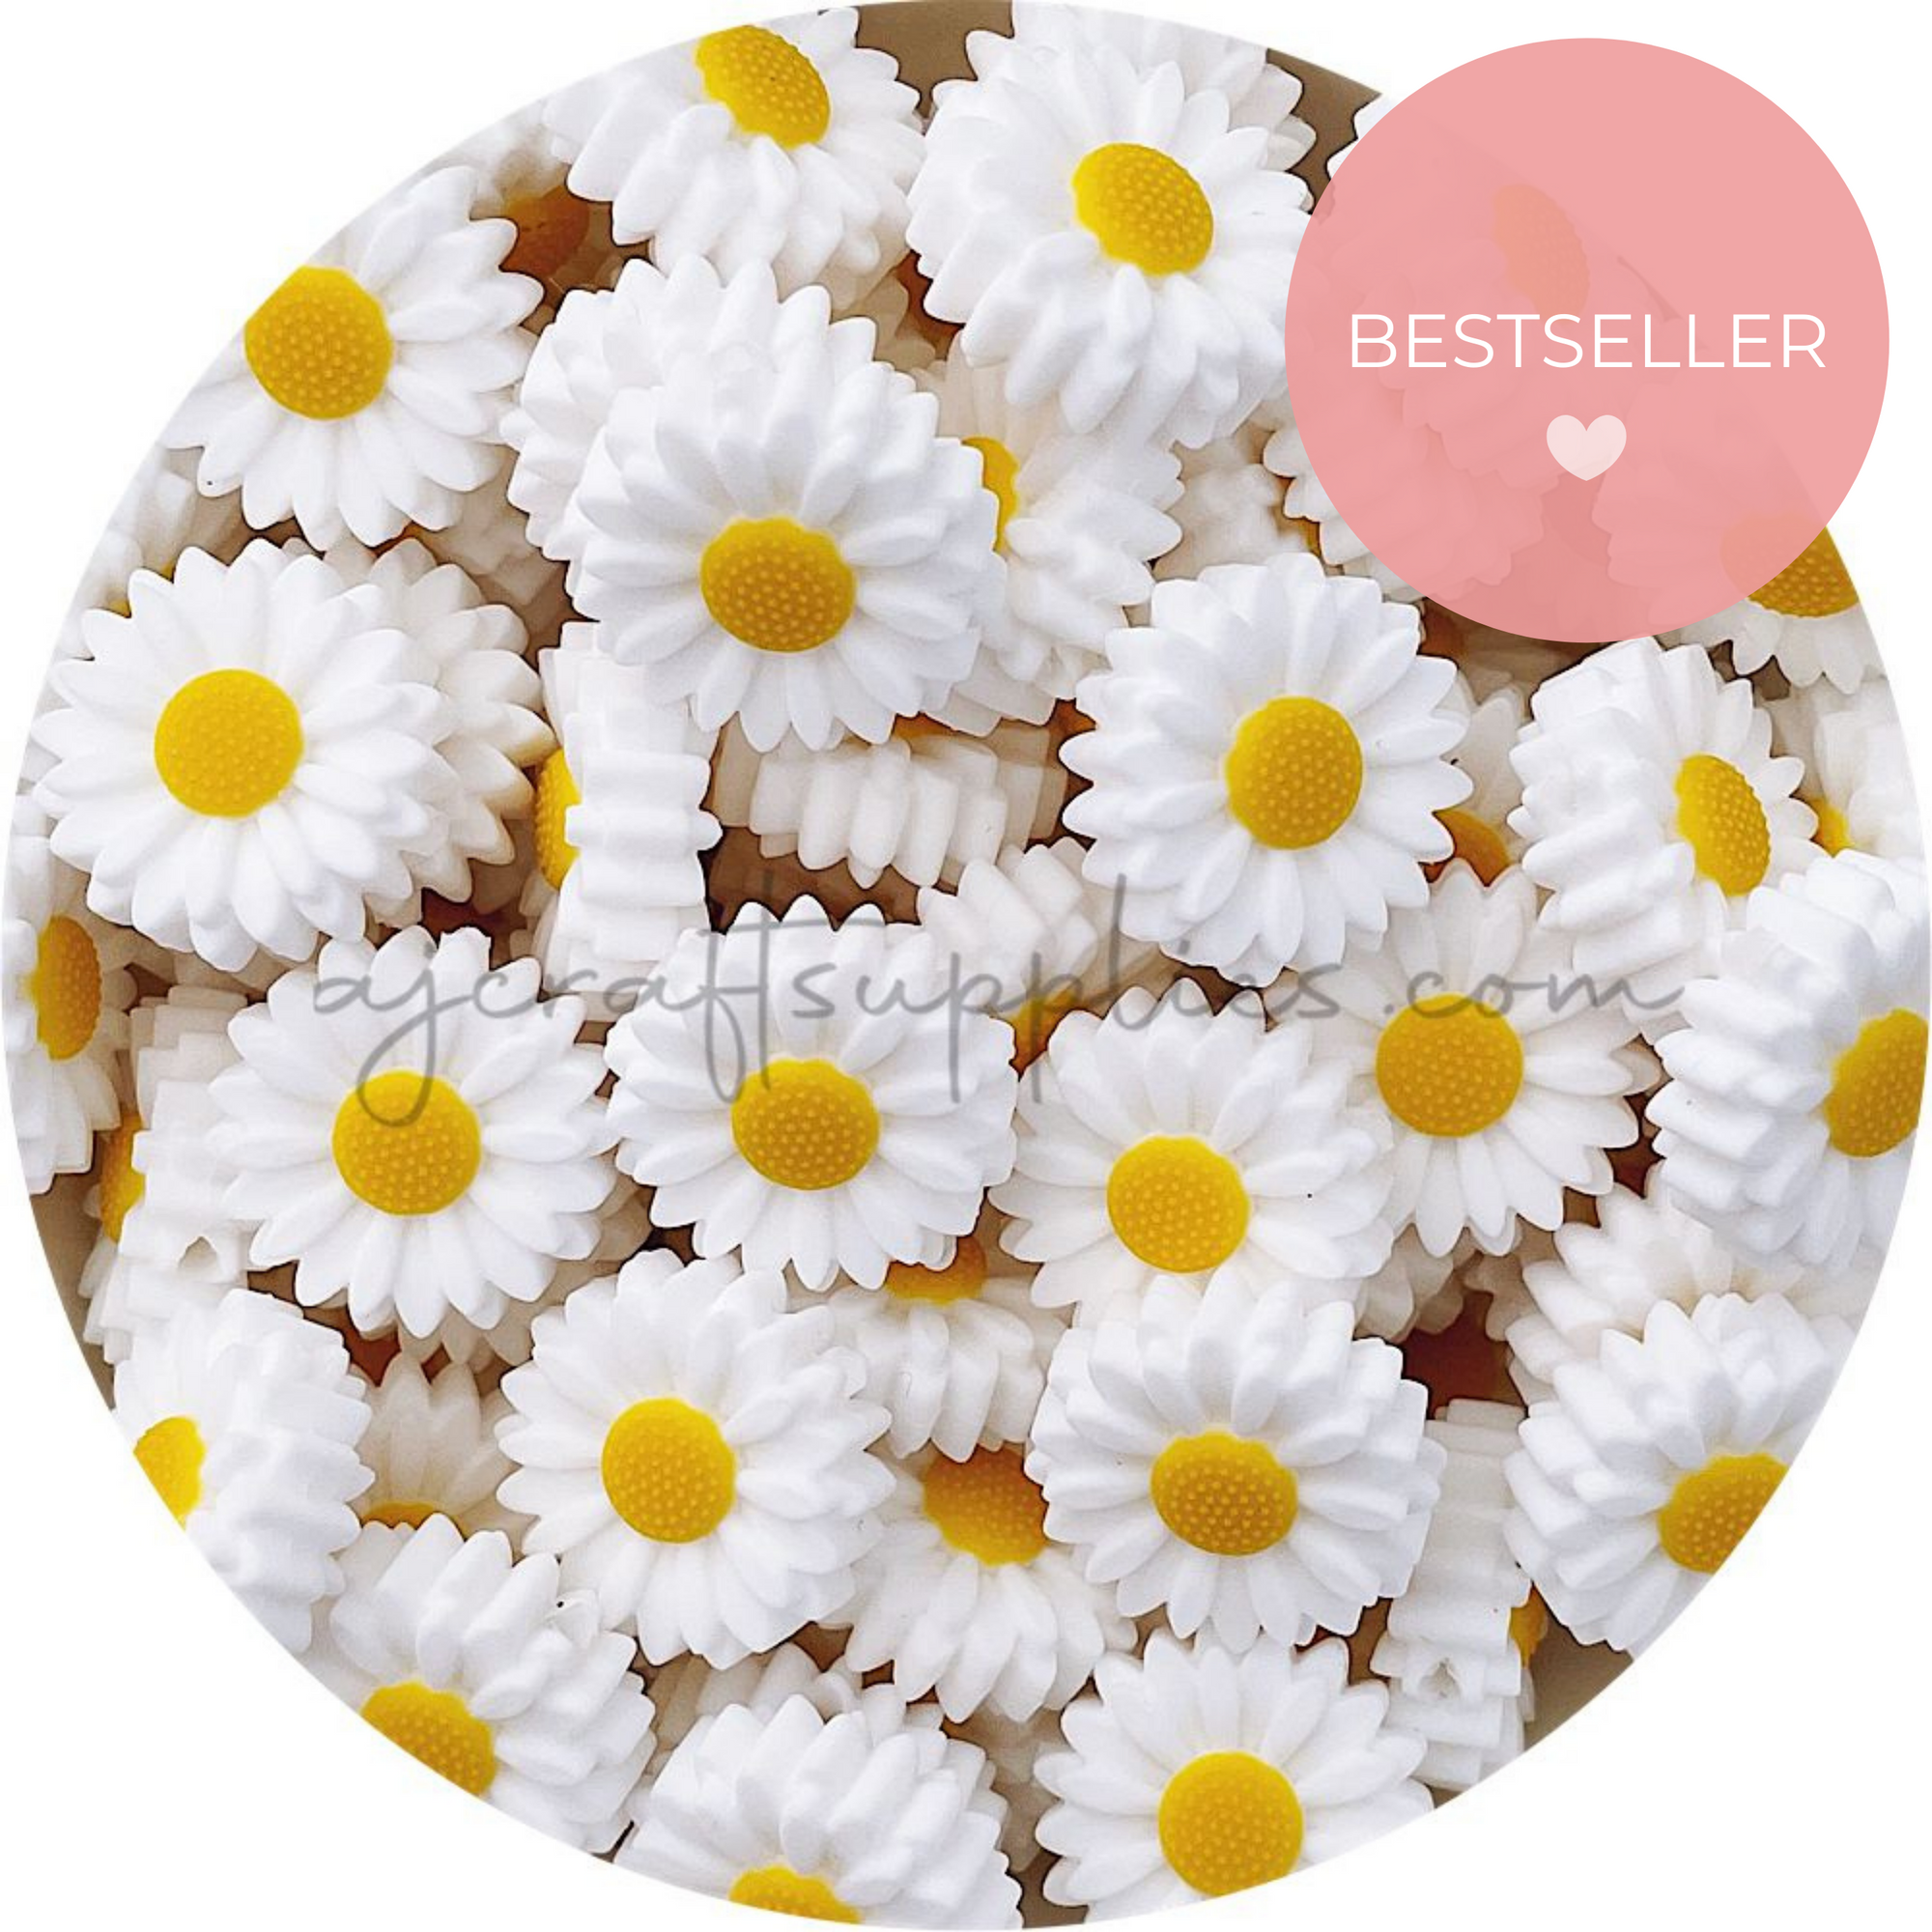 Snow White- 22mm Mini Daisy Silicone Beads - 2 beads